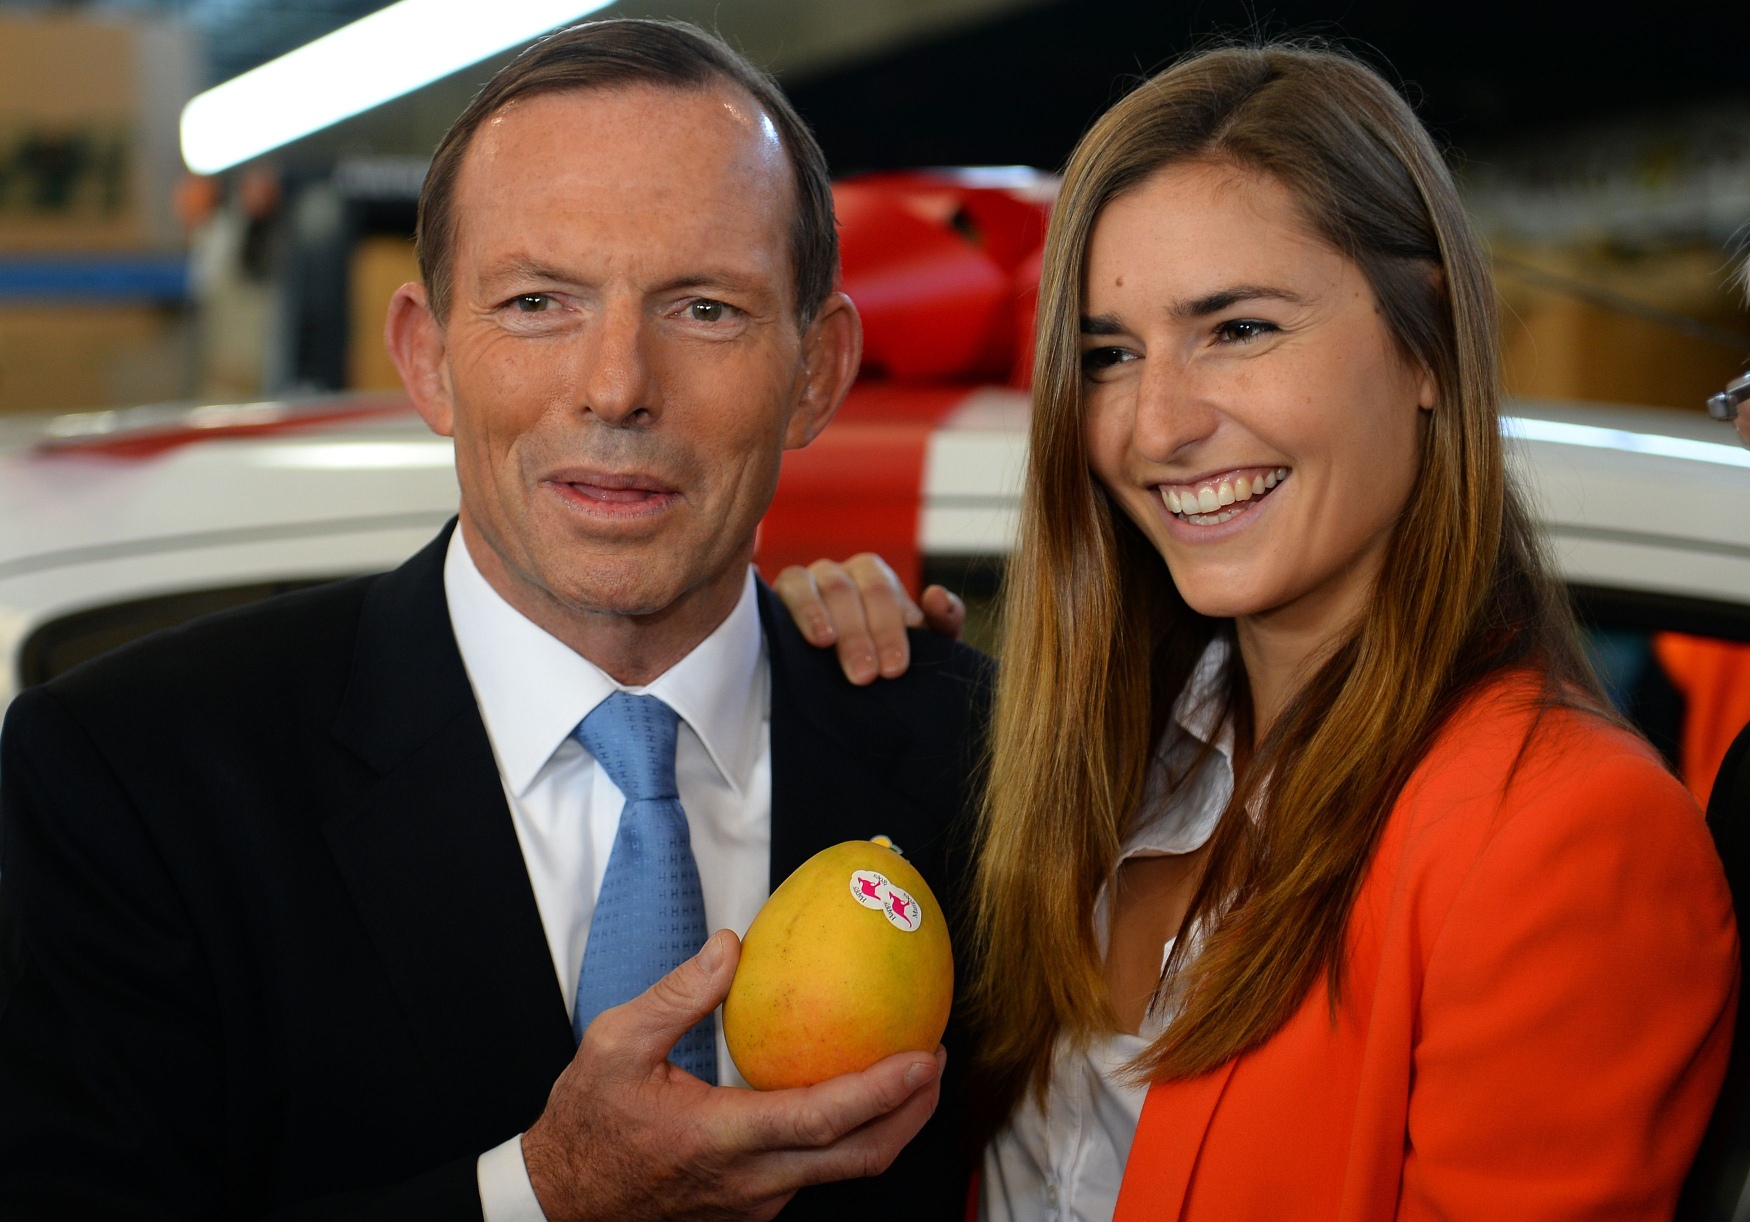 Australian opposition leader Tony Abbott campaigning with his daughter in Sydney. Photo: AFP